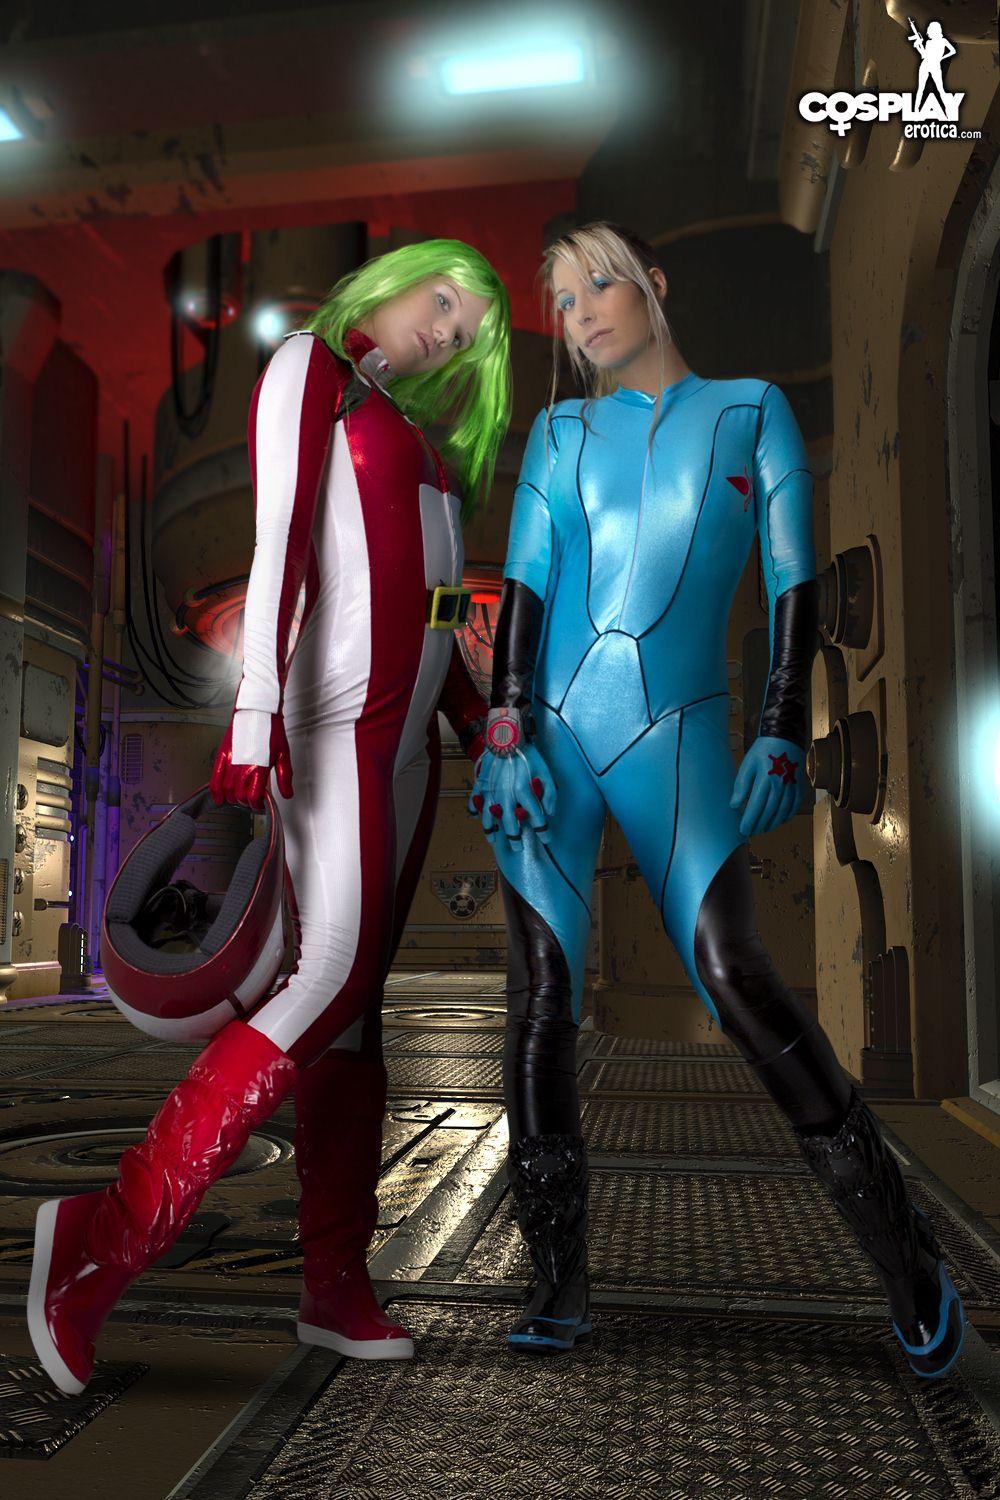 Cosplayers Sandy Bell and Ginger dress up as Metroid characters and get it on #54531009